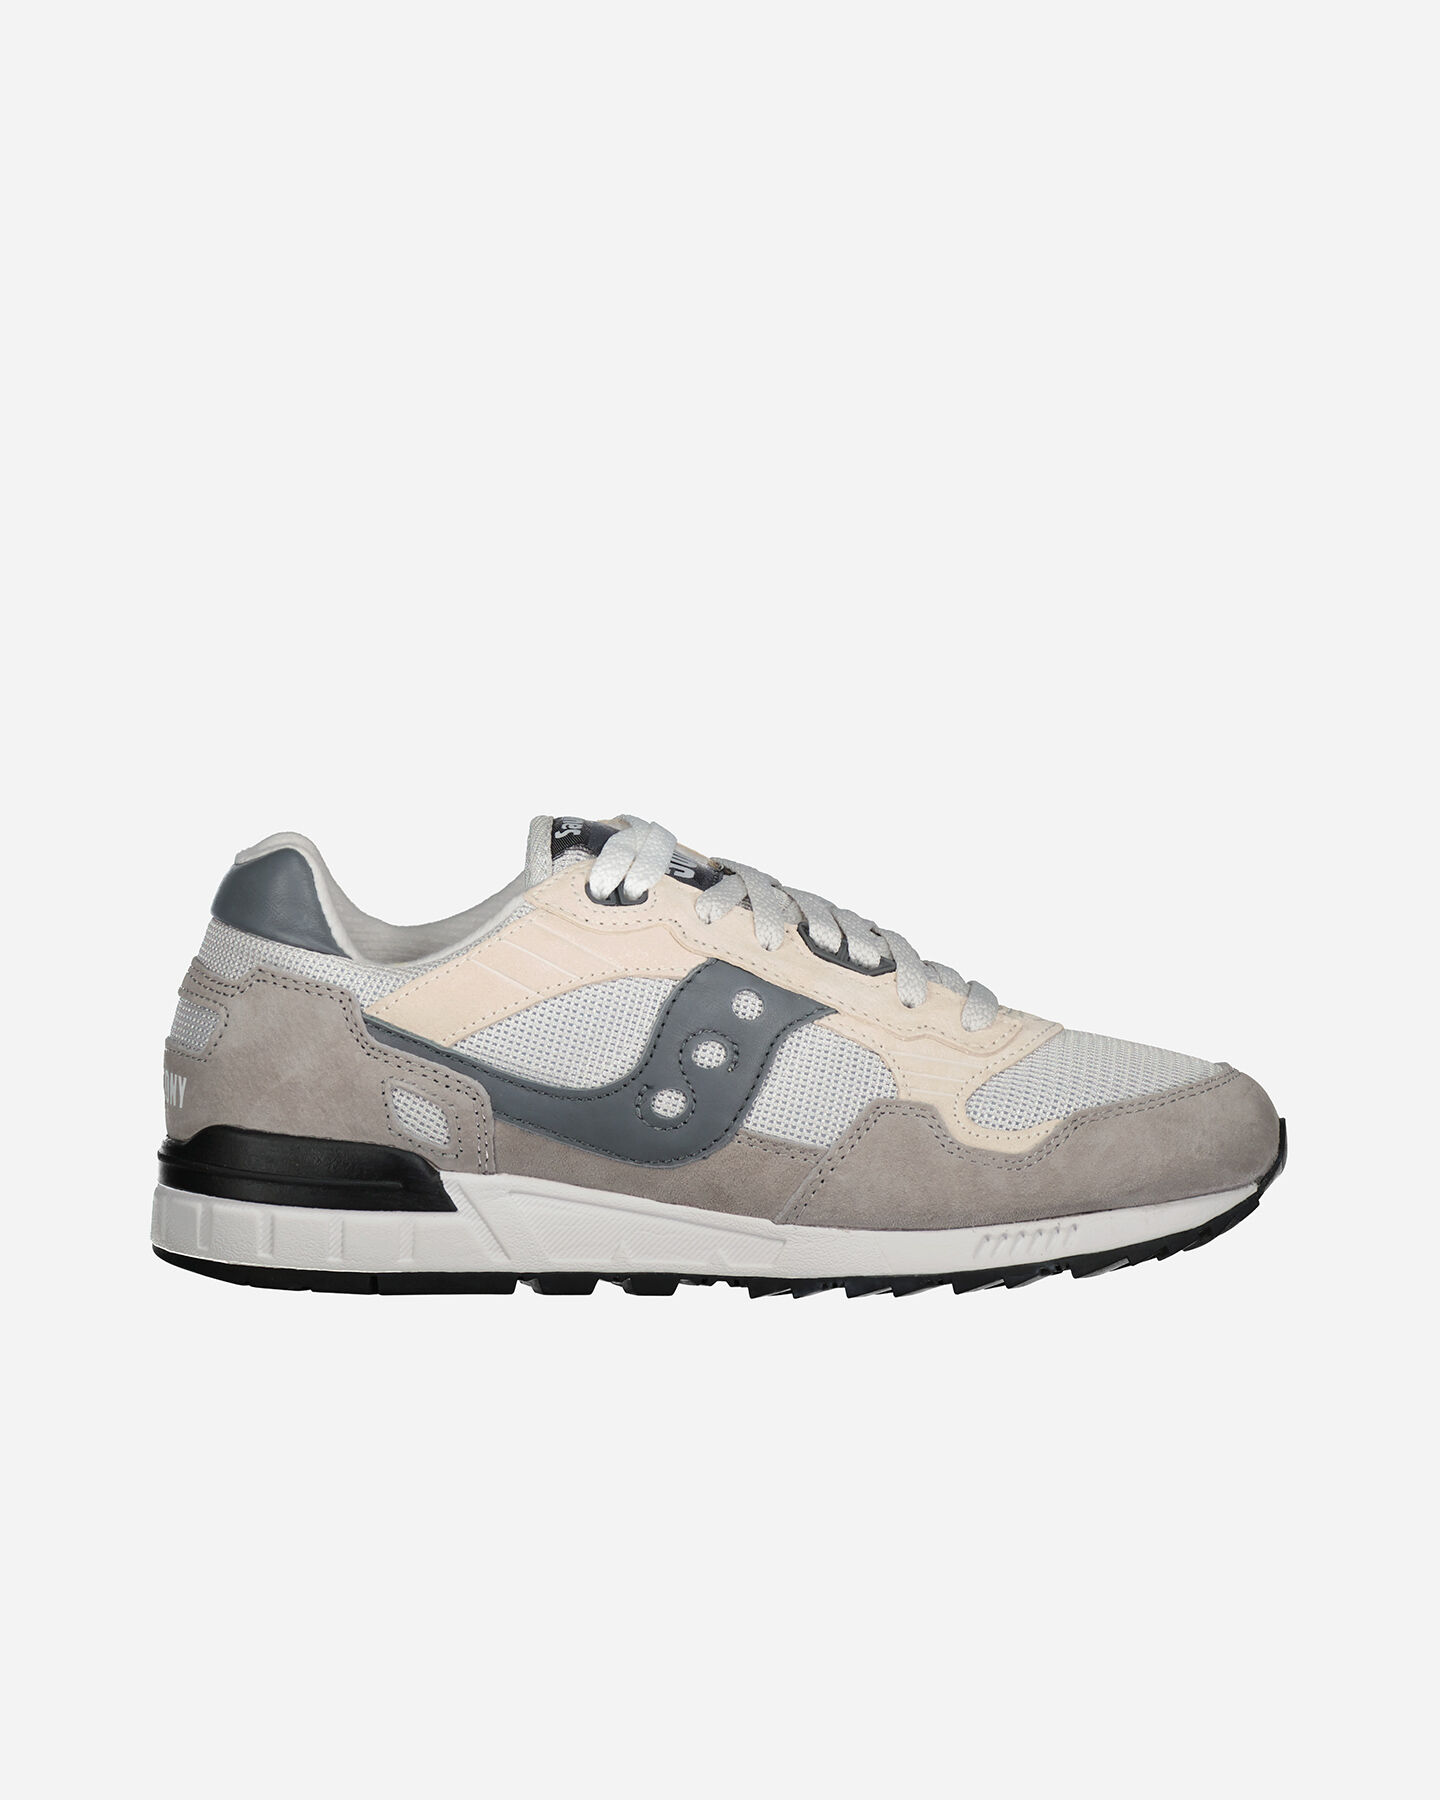  Scarpe sneakers SAUCONY SHADOW 5000 M S5678863|38|7 scatto 0